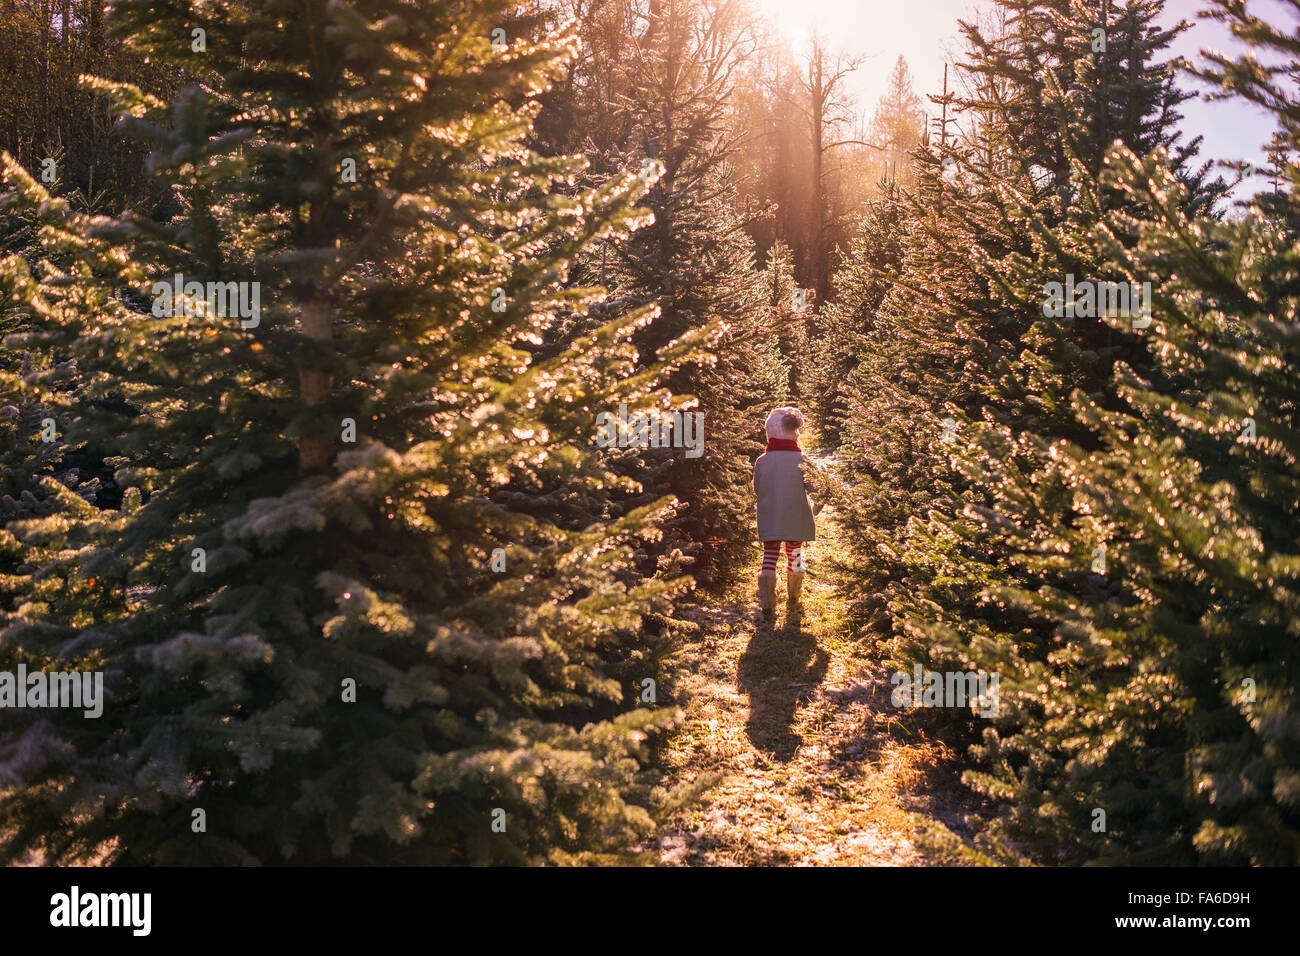 Girl walking between two rows of trees Stock Photo